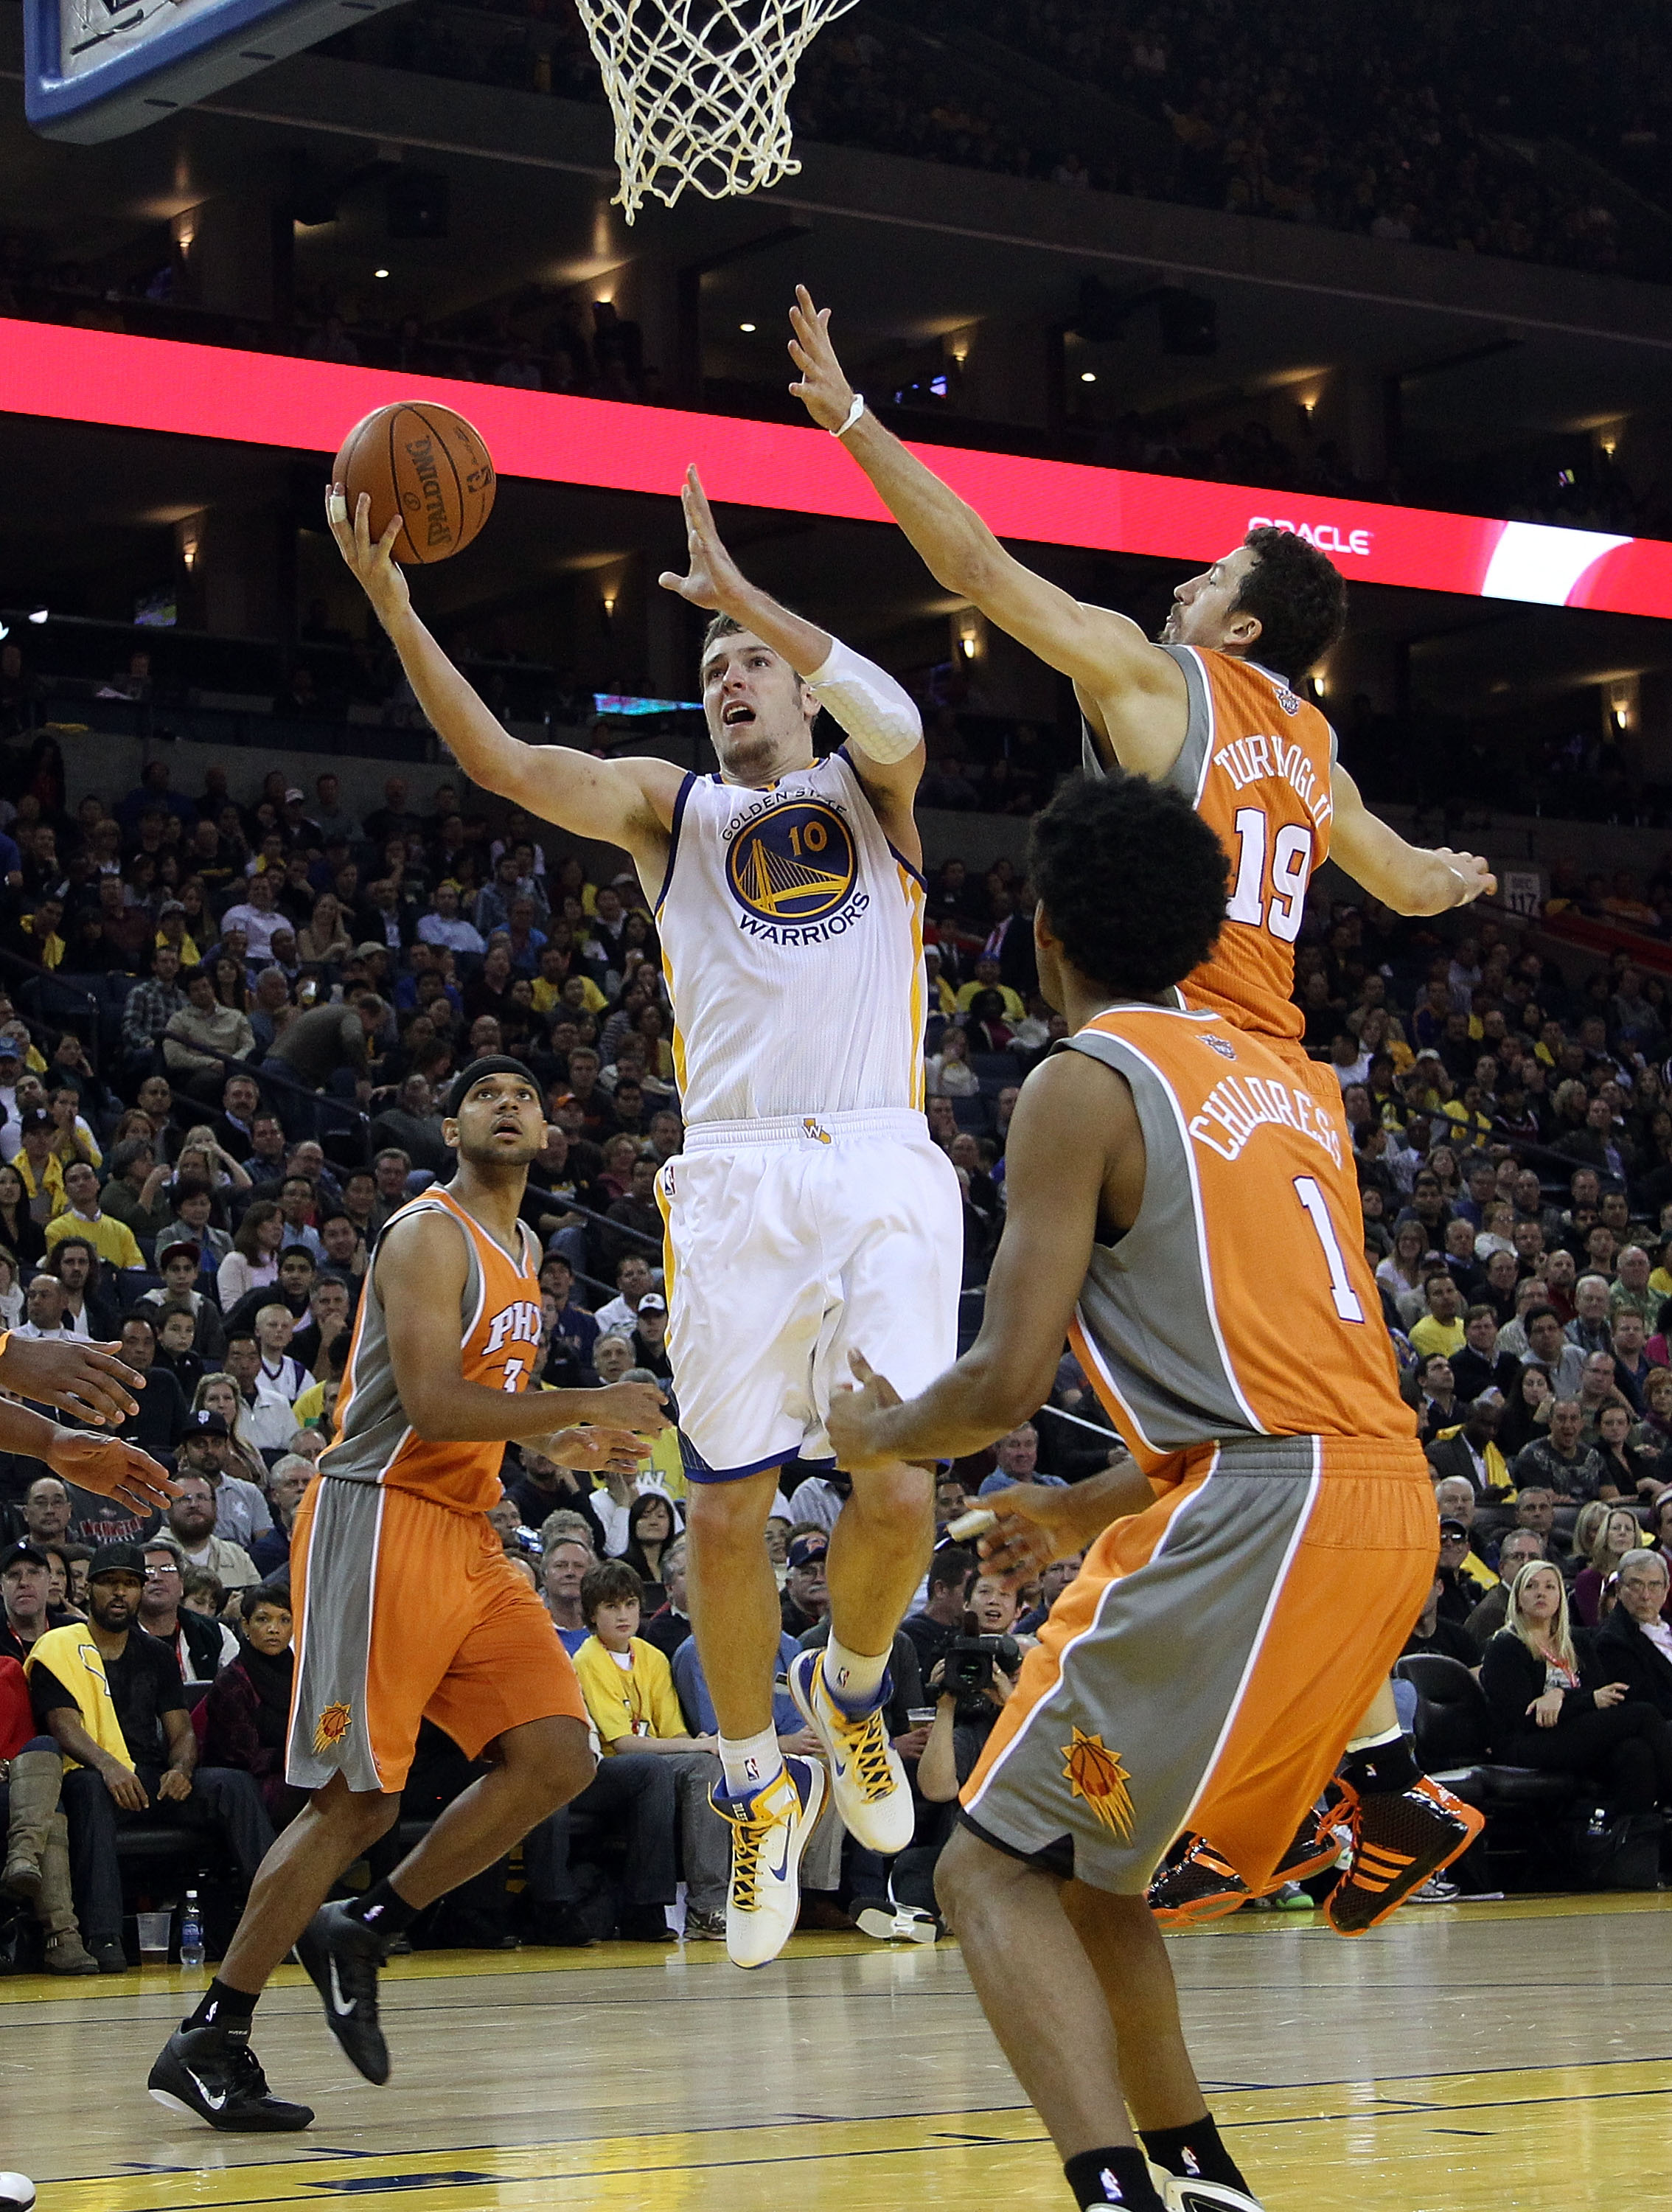 OAKLAND, CA - DECEMBER 02:  David Lee #10 of the Golden State Warriors in action against the Phoenix Suns at Oracle Arena on December 2, 2010 in Oakland, California. NOTE TO USER: User expressly acknowledges and agrees that, by downloading and or using th